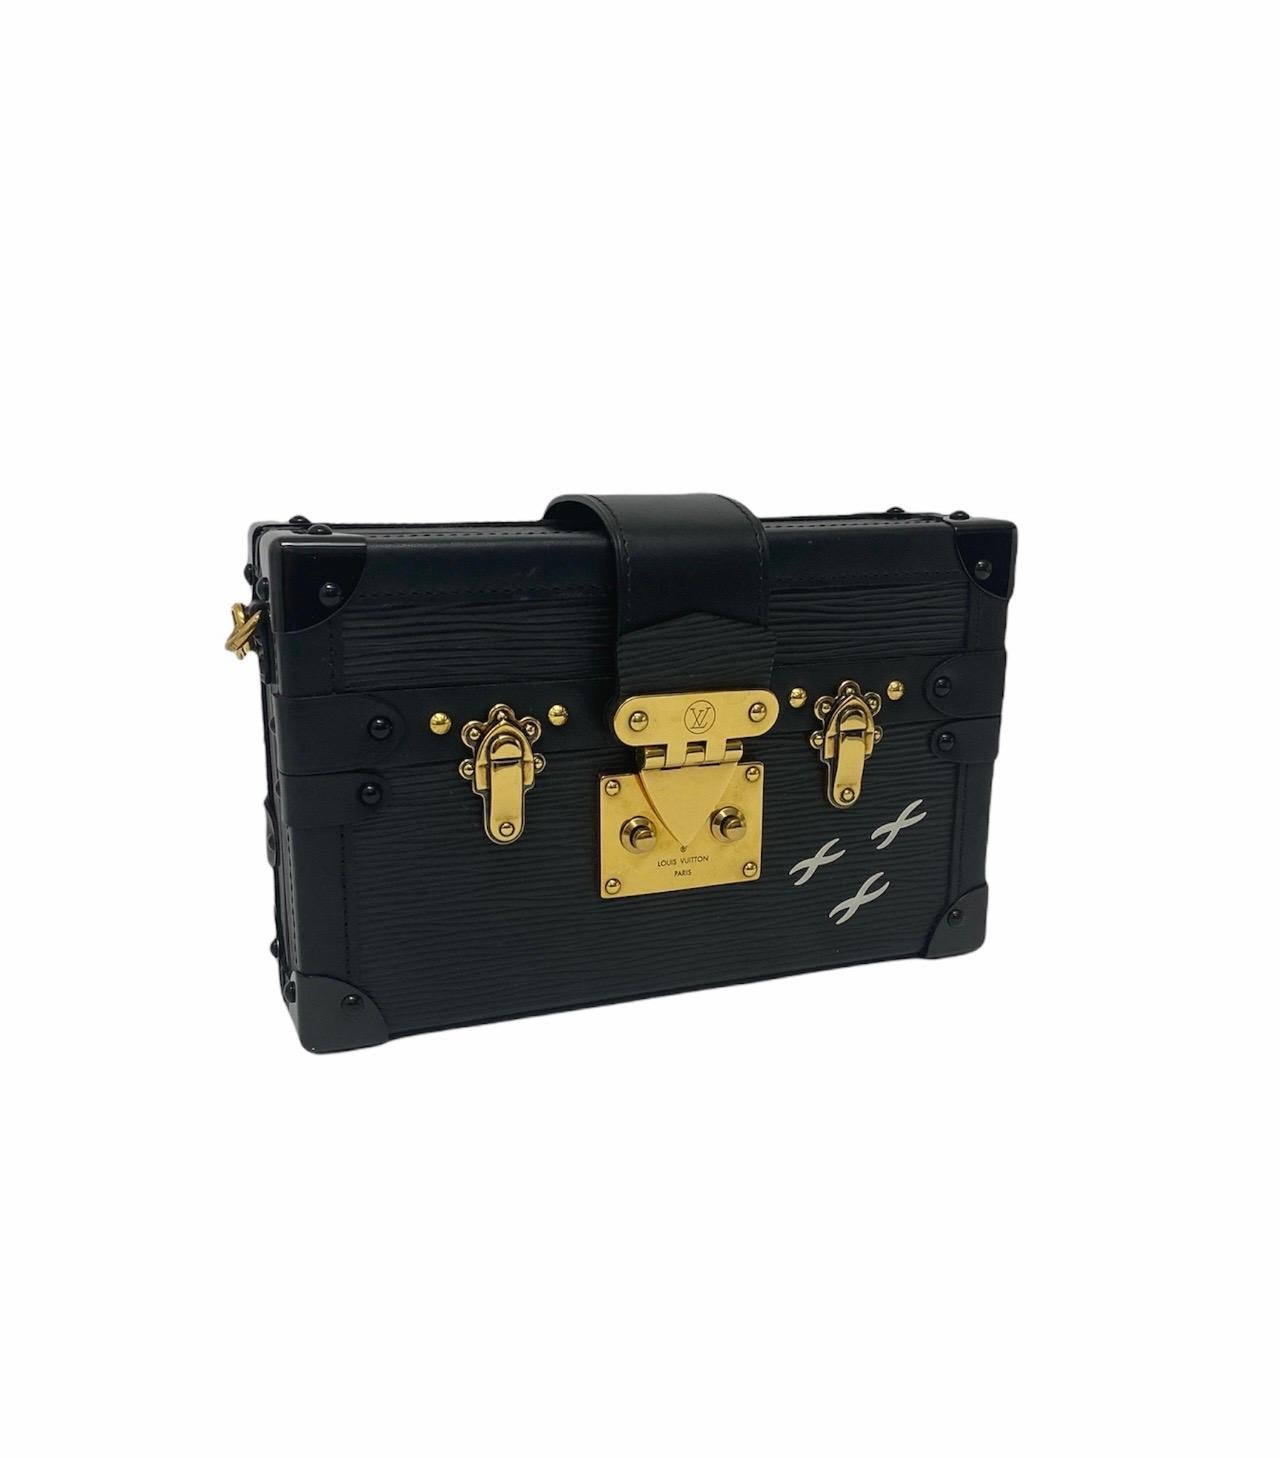 Louis Vuitton Petite Malle, is a bag that pays homage to Louis Vuitton trunks  reproducing every detail, from the shape to the iconic s-closure, up to the golden metal parts.  The exclusive model is made of Epi leather, with smooth calfskin trim and